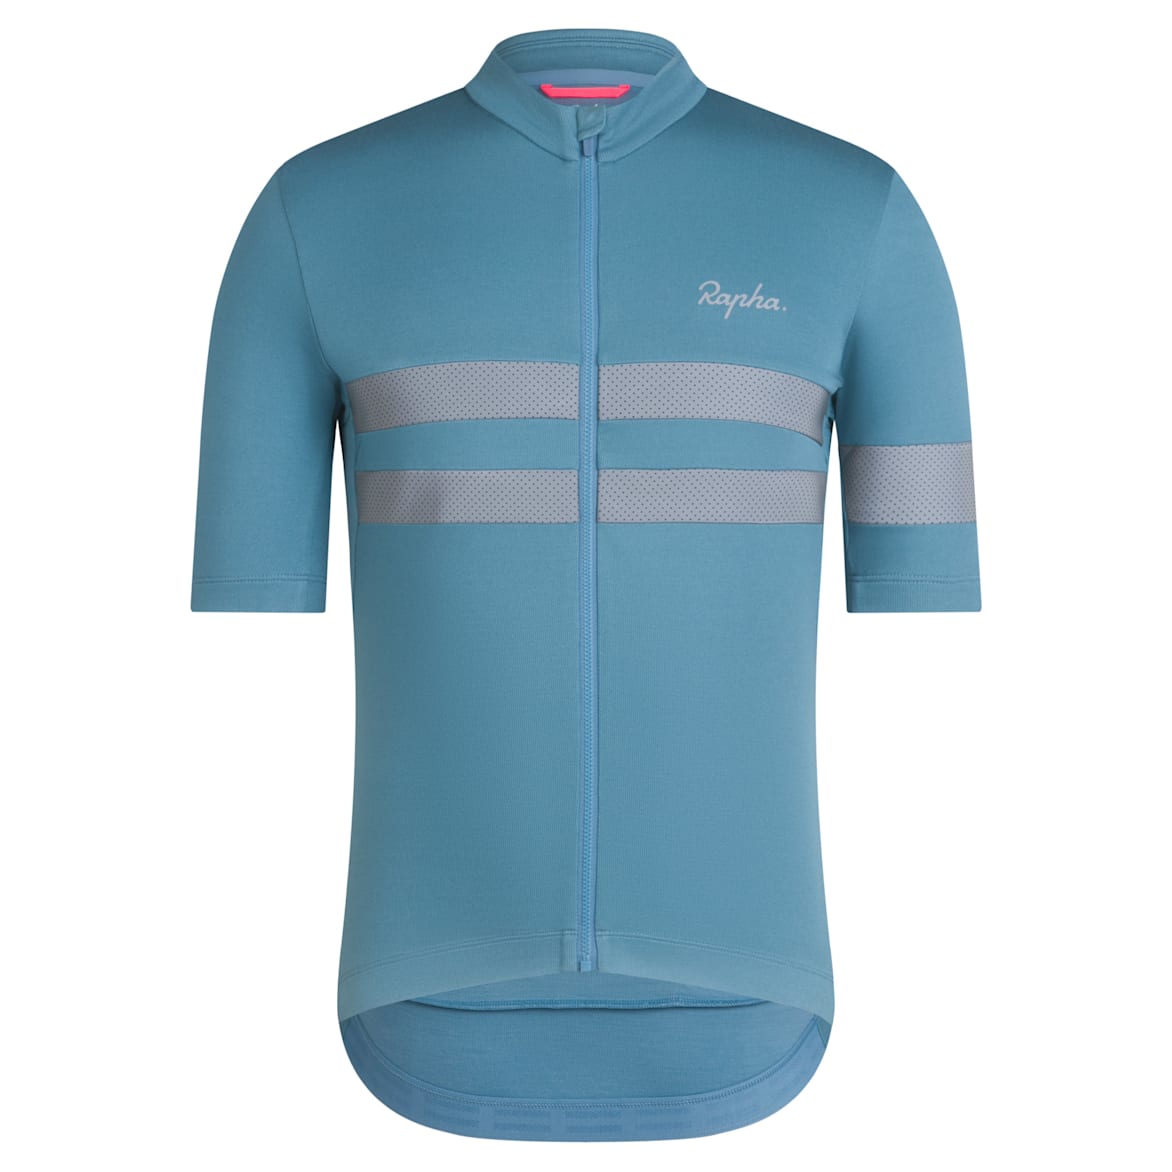 Mens Cycling Jersey Collection, Our Best all-conditions Jerseys